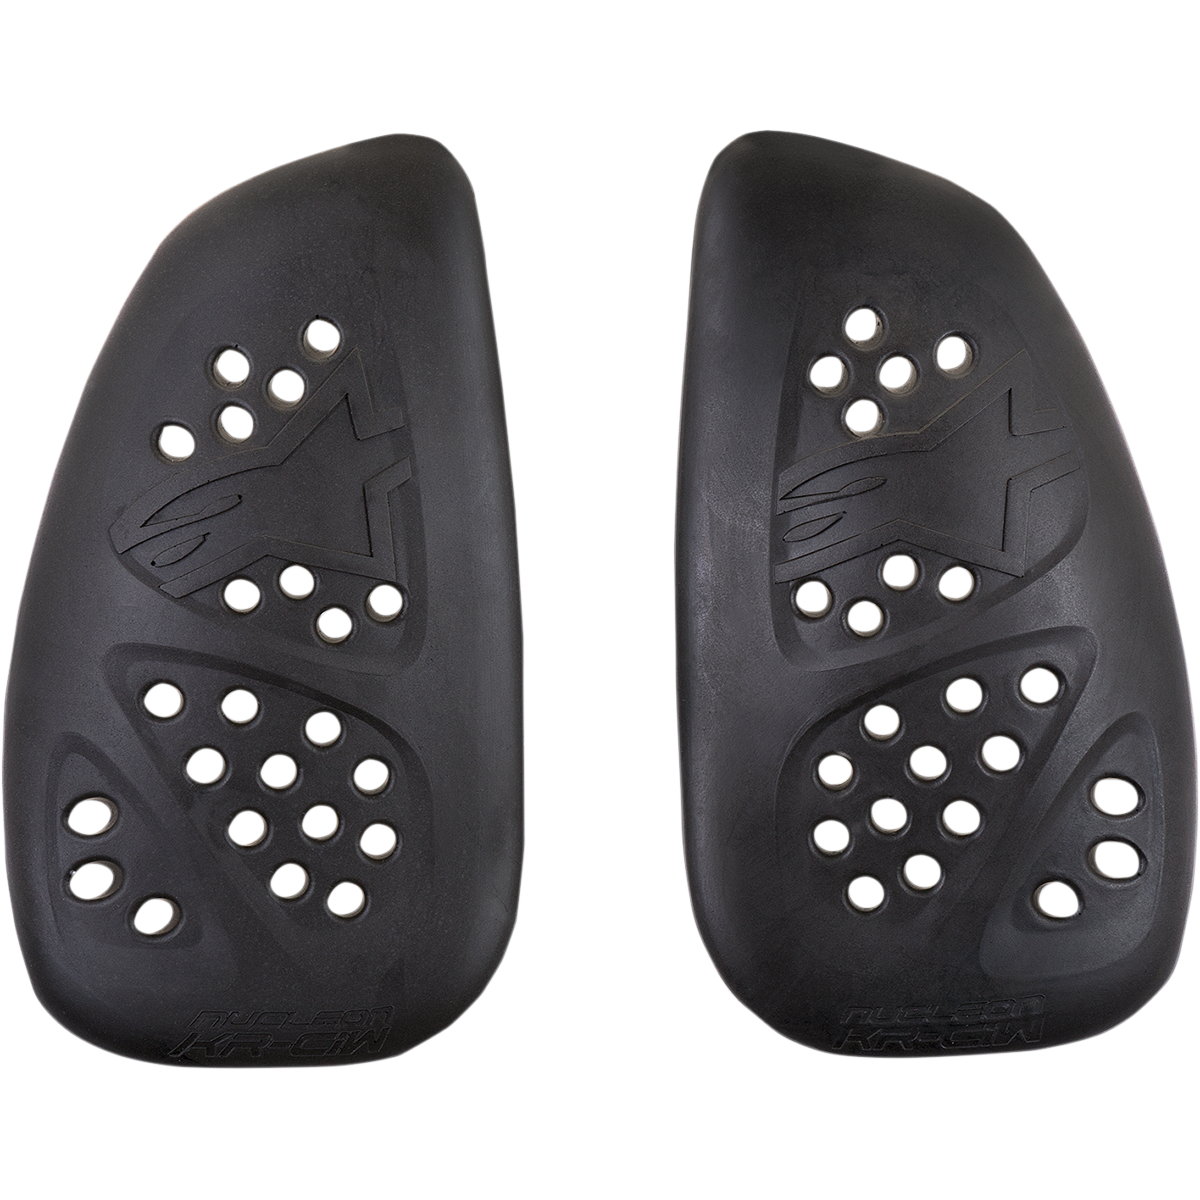 KR-CiW Women's Chest Protector Inserts